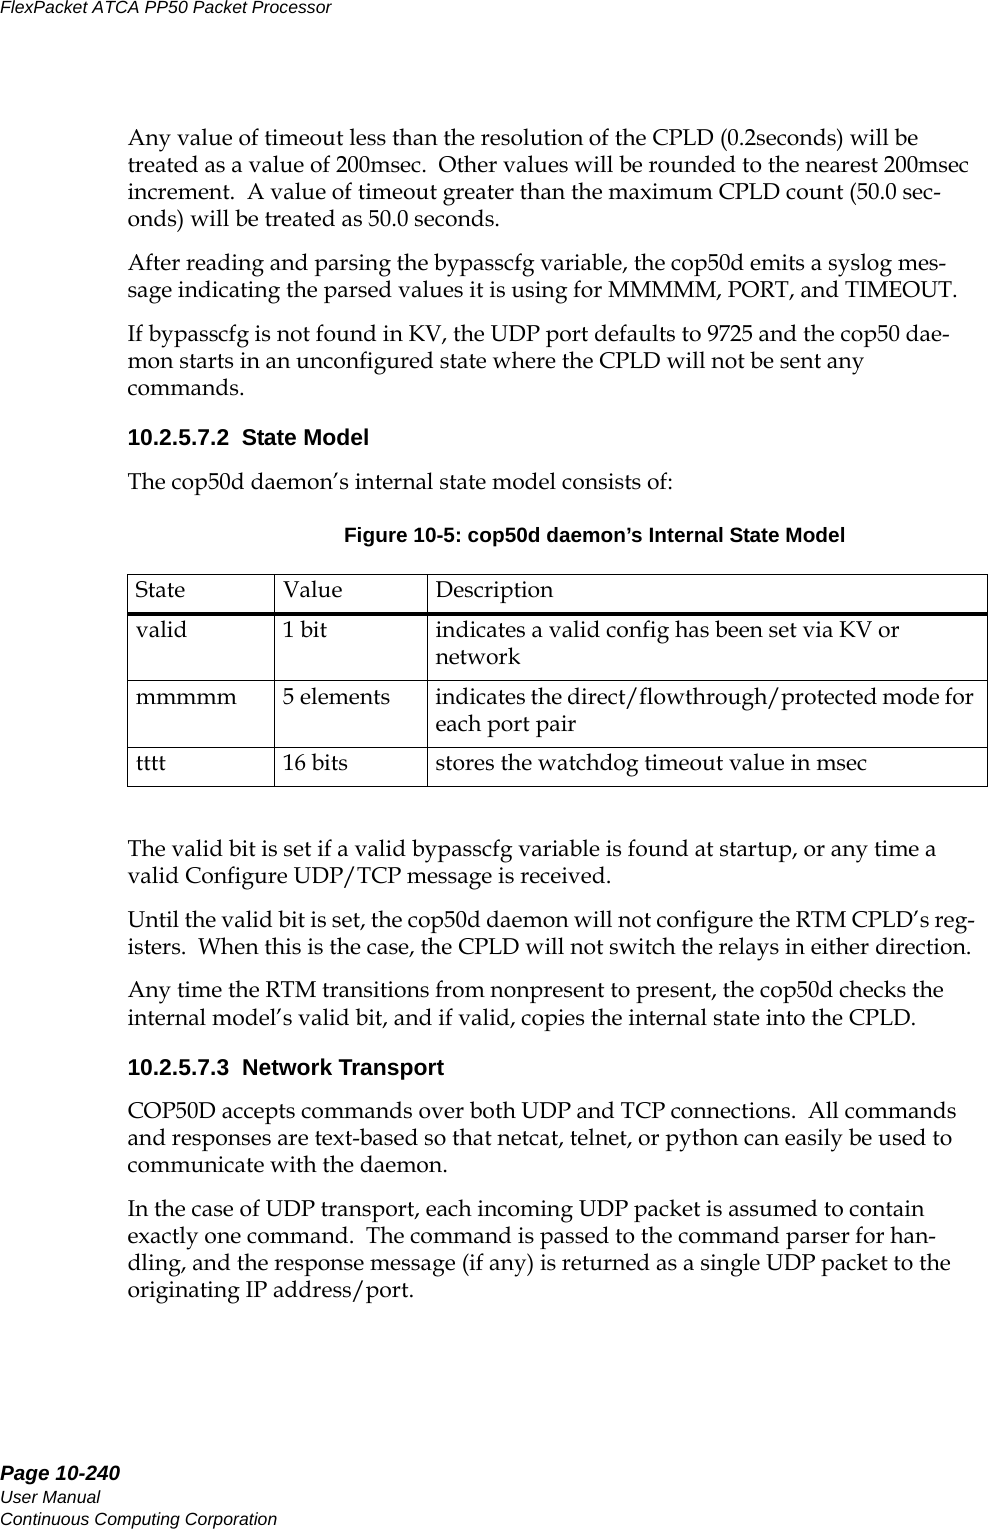 Page 10-240User ManualContinuous Computing CorporationFlexPacket ATCA PP50 Packet Processor     PreliminaryAny value of timeout less than the resolution of the CPLD (0.2seconds) will be treated as a value of 200msec.  Other values will be rounded to the nearest 200msec increment.  A value of timeout greater than the maximum CPLD count (50.0 sec-onds) will be treated as 50.0 seconds.  After reading and parsing the bypasscfg variable, the cop50d emits a syslog mes-sage indicating the parsed values it is using for MMMMM, PORT, and TIMEOUT.If bypasscfg is not found in KV, the UDP port defaults to 9725 and the cop50 dae-mon starts in an unconfigured state where the CPLD will not be sent any commands.10.2.5.7.2  State ModelThe cop50d daemon’s internal state model consists of:The valid bit is set if a valid bypasscfg variable is found at startup, or any time a valid Configure UDP/TCP message is received.Until the valid bit is set, the cop50d daemon will not configure the RTM CPLD’s reg-isters.  When this is the case, the CPLD will not switch the relays in either direction.Any time the RTM transitions from nonpresent to present, the cop50d checks the internal model’s valid bit, and if valid, copies the internal state into the CPLD.10.2.5.7.3  Network TransportCOP50D accepts commands over both UDP and TCP connections.  All commands and responses are text-based so that netcat, telnet, or python can easily be used to communicate with the daemon.In the case of UDP transport, each incoming UDP packet is assumed to contain exactly one command.  The command is passed to the command parser for han-dling, and the response message (if any) is returned as a single UDP packet to the originating IP address/port.Figure 10-5: cop50d daemon’s Internal State Model State Value Descriptionvalid 1 bit indicates a valid config has been set via KV or networkmmmmm 5 elements indicates the direct/flowthrough/protected mode for each port pairtttt 16 bits stores the watchdog timeout value in msec